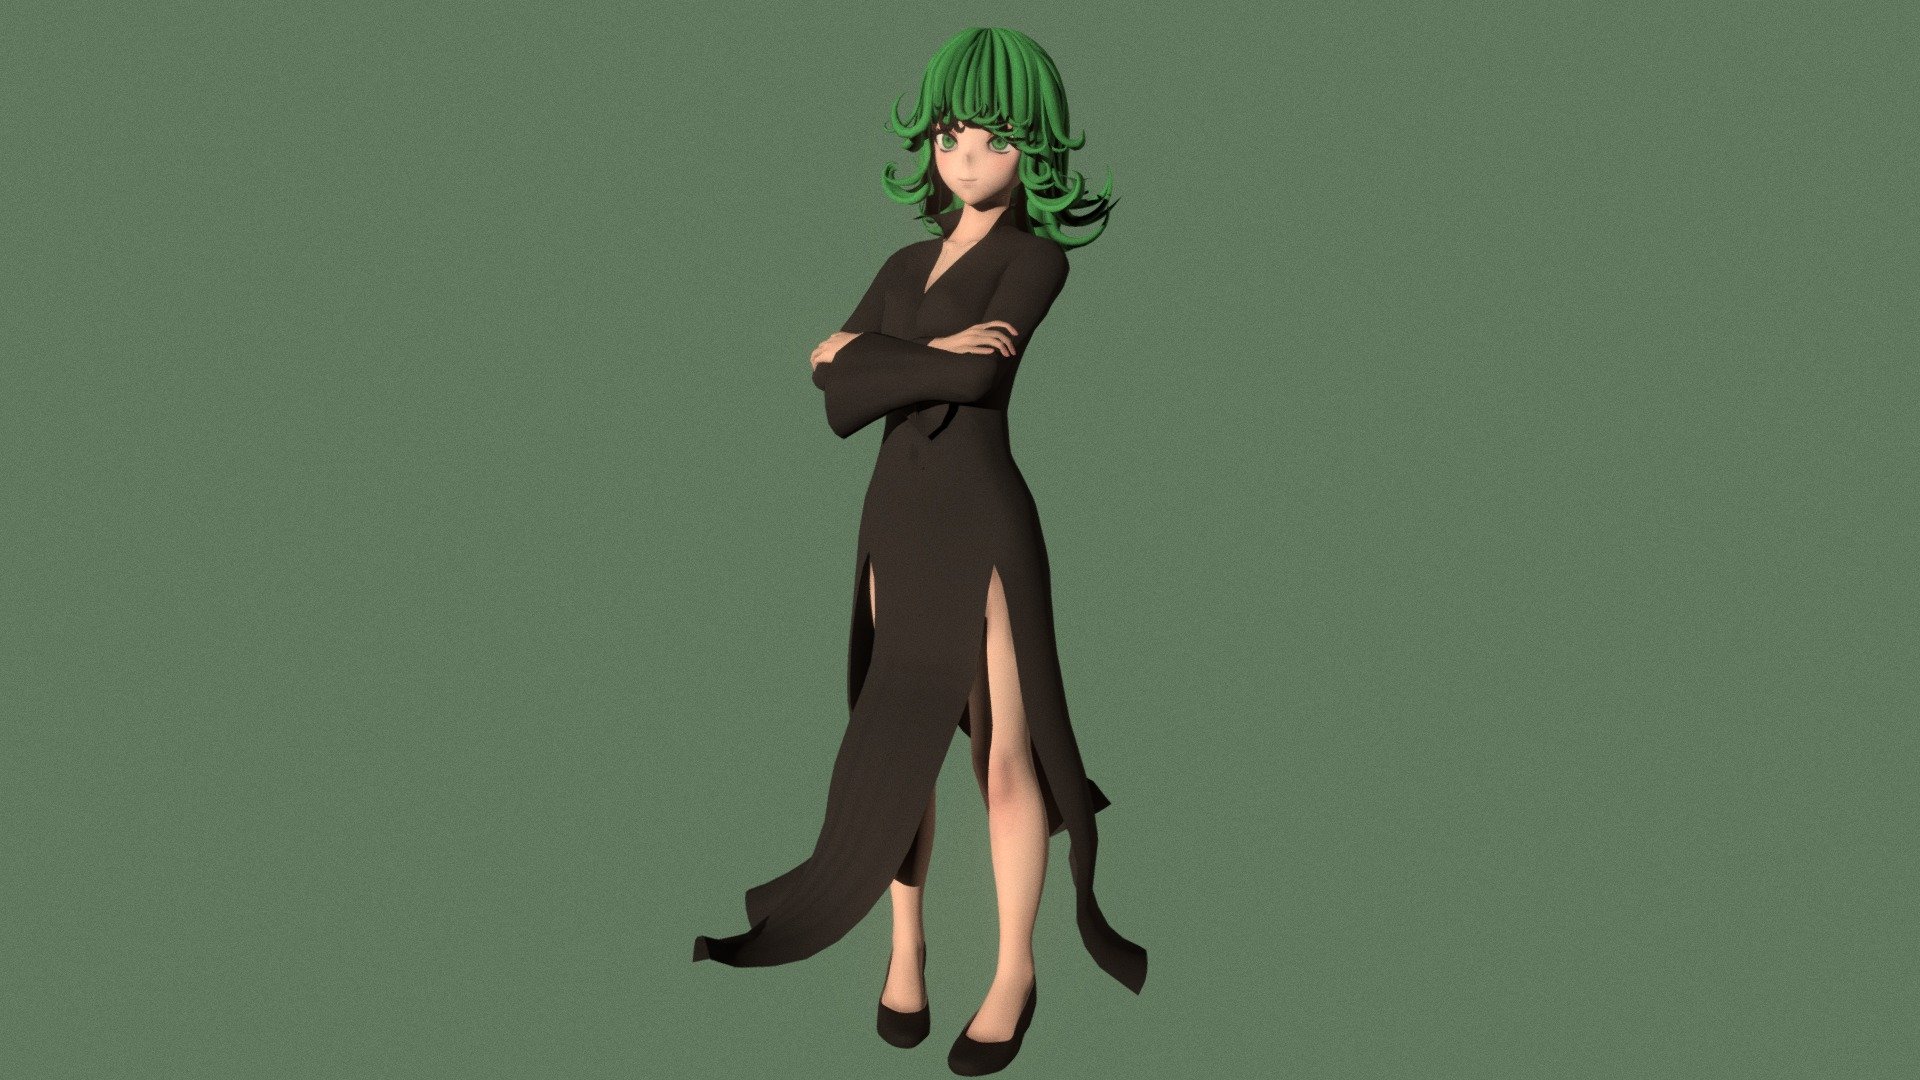 Posed model of anime girl Tatsumaki (One Punch Man).

This product include .FBX (ver. 7200) and .MAX (ver. 2010) files.

Rigged version: https://sketchfab.com/3d-models/t-pose-rigged-model-of-tatsumaki-e369fd71e88e4191b335c974b022eed5

I support convert this 3D model to various file formats: 3DS; AI; ASE; DAE; DWF; DWG; DXF; FLT; HTR; IGS; M3G; MQO; OBJ; SAT; STL; W3D; WRL; X.

You can buy all of my models in one pack to save cost: https://sketchfab.com/3d-models/all-of-my-anime-girls-c5a56156994e4193b9e8fa21a3b8360b

And I can make commission models.

If you have any questions, please leave a comment or contact me via my email 3d.eden.project@gmail.com 3d model